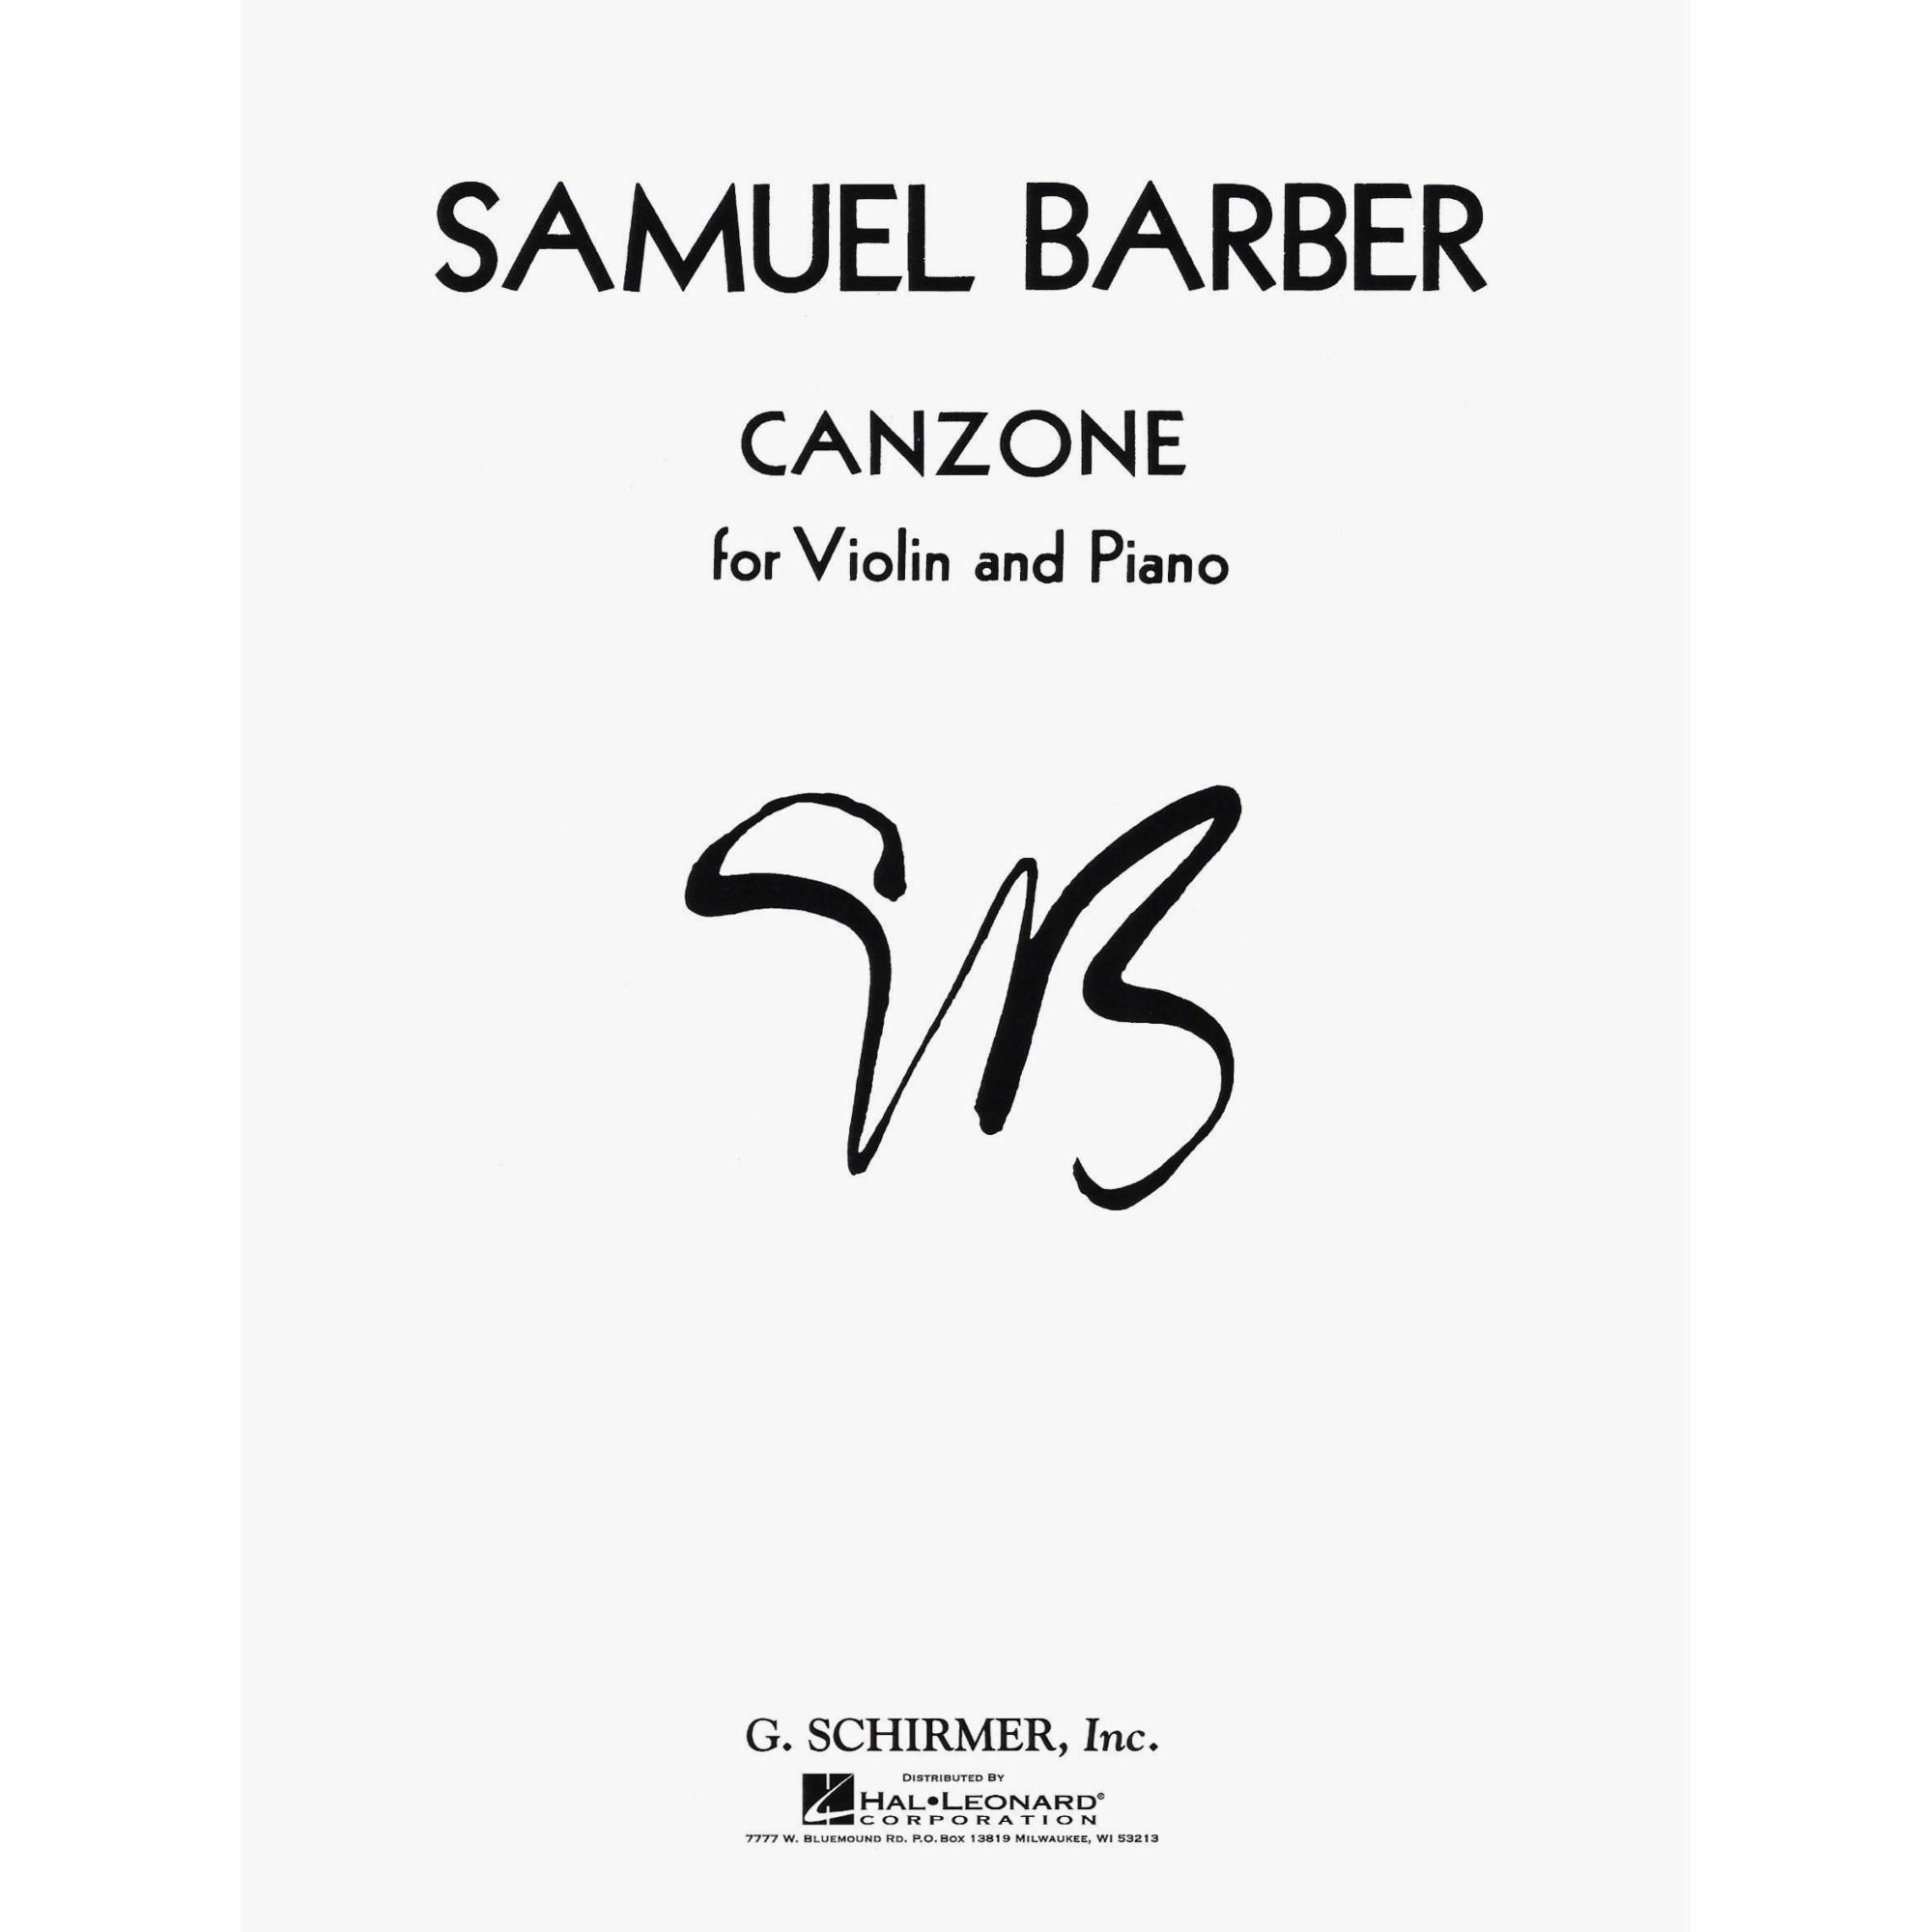 Barber - Canzone for Violin and Piano